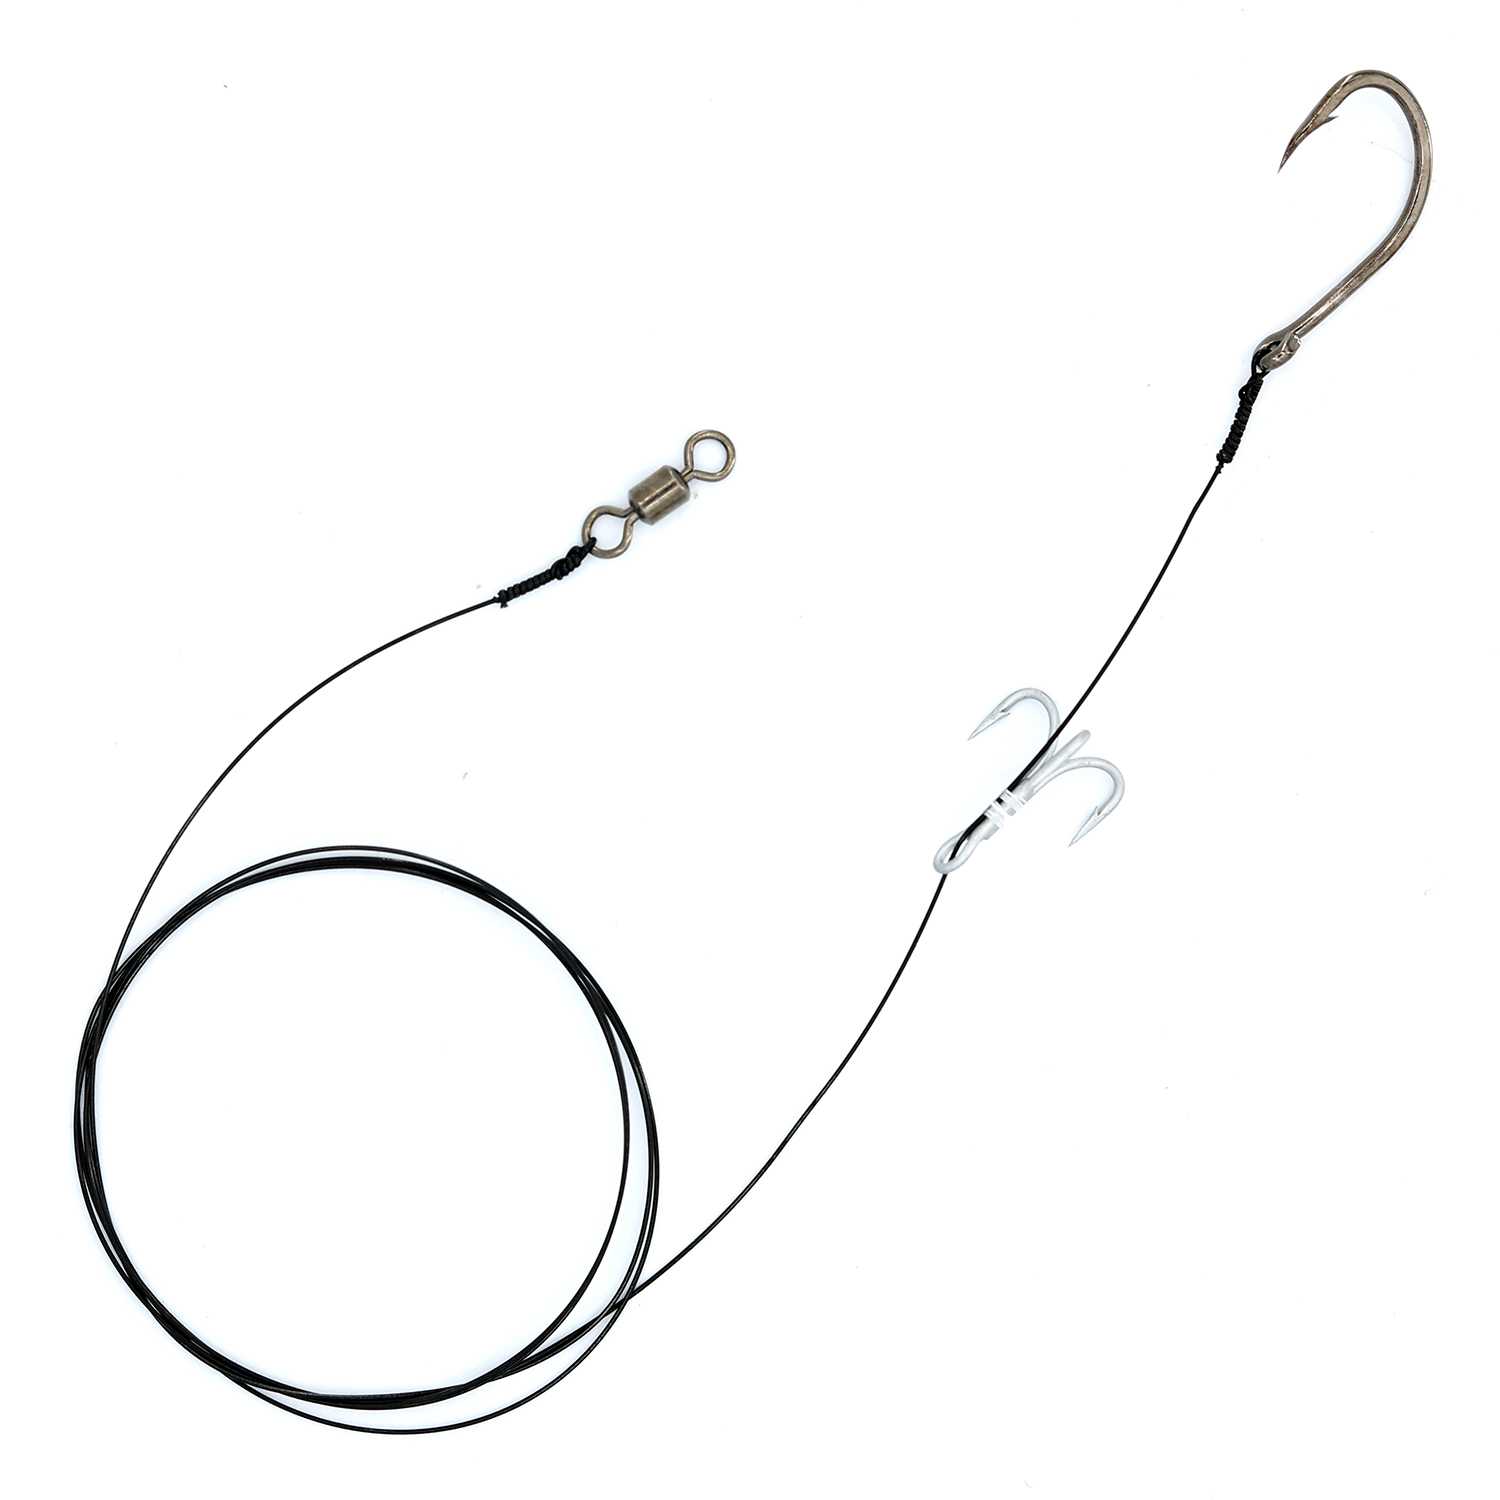 qareb american wire rig with hook size 0/6 and treble hook size 4, wire test 30lb